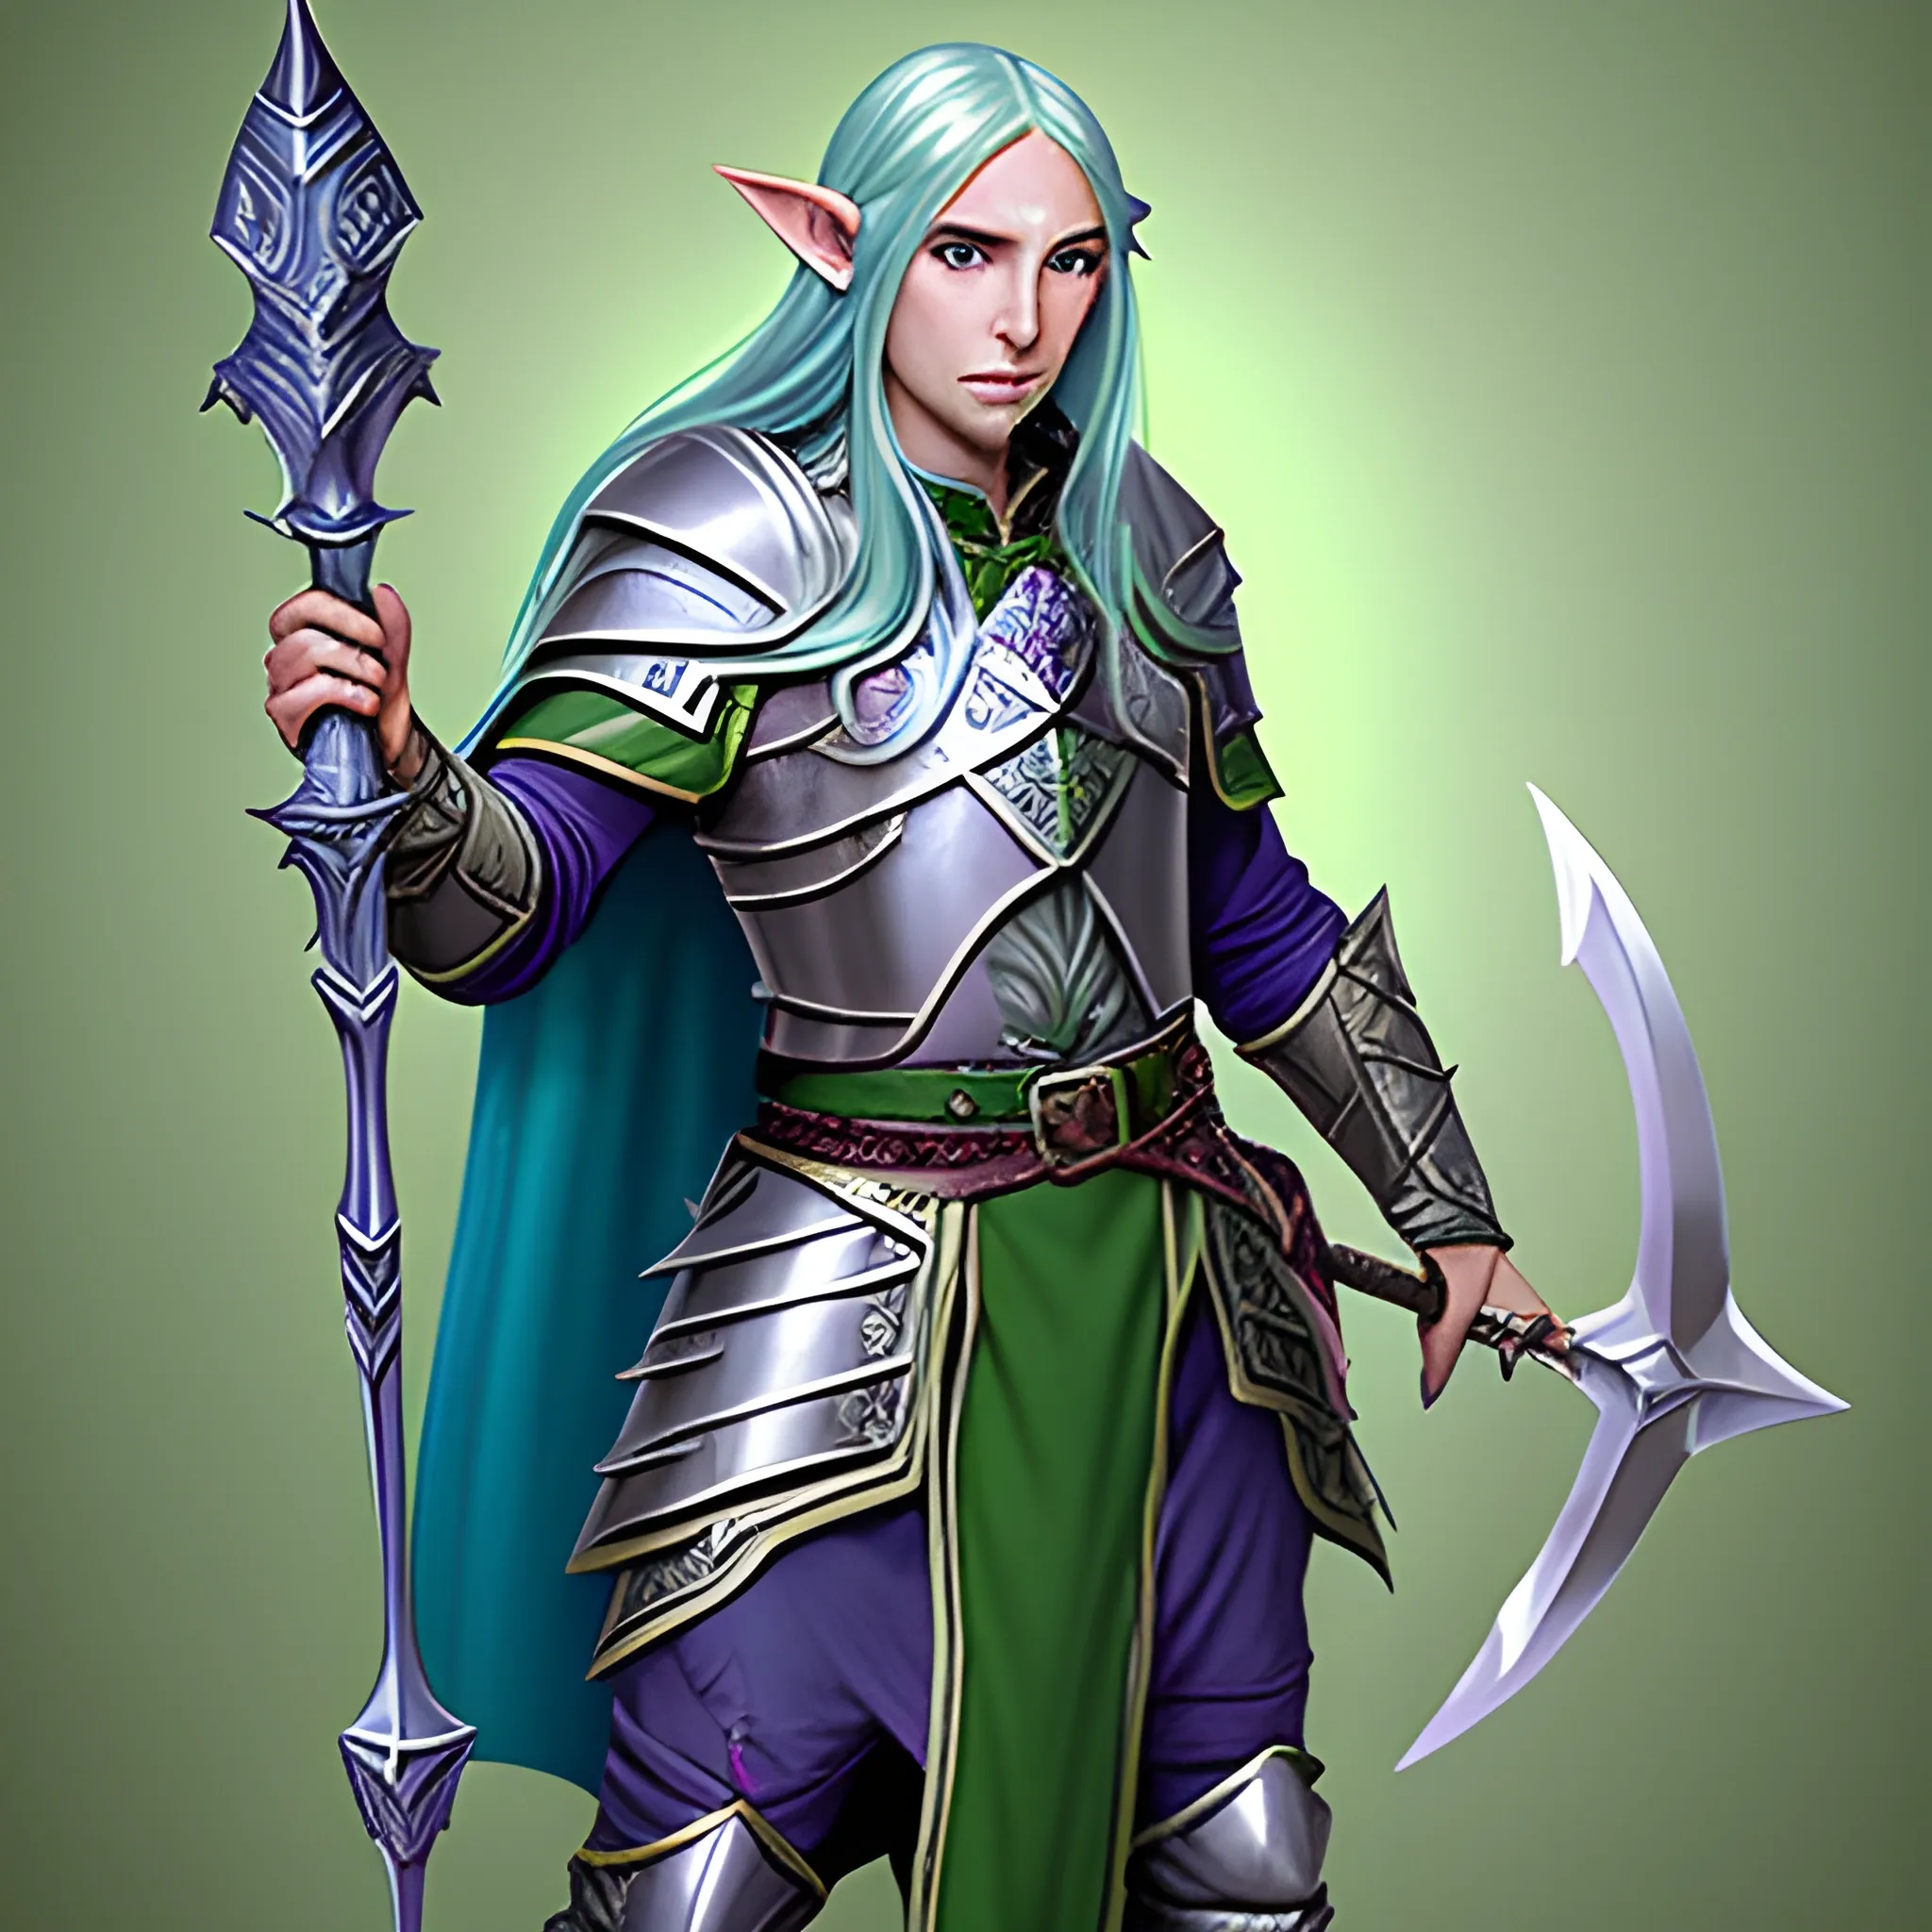 Create a dungeons and dragons character which is an Eladrin Elf male Twilight Cleric of Selune with green long hair and piercing blue eyes, wearing scale mail armor, a rapier, and a shield, Oil Painting